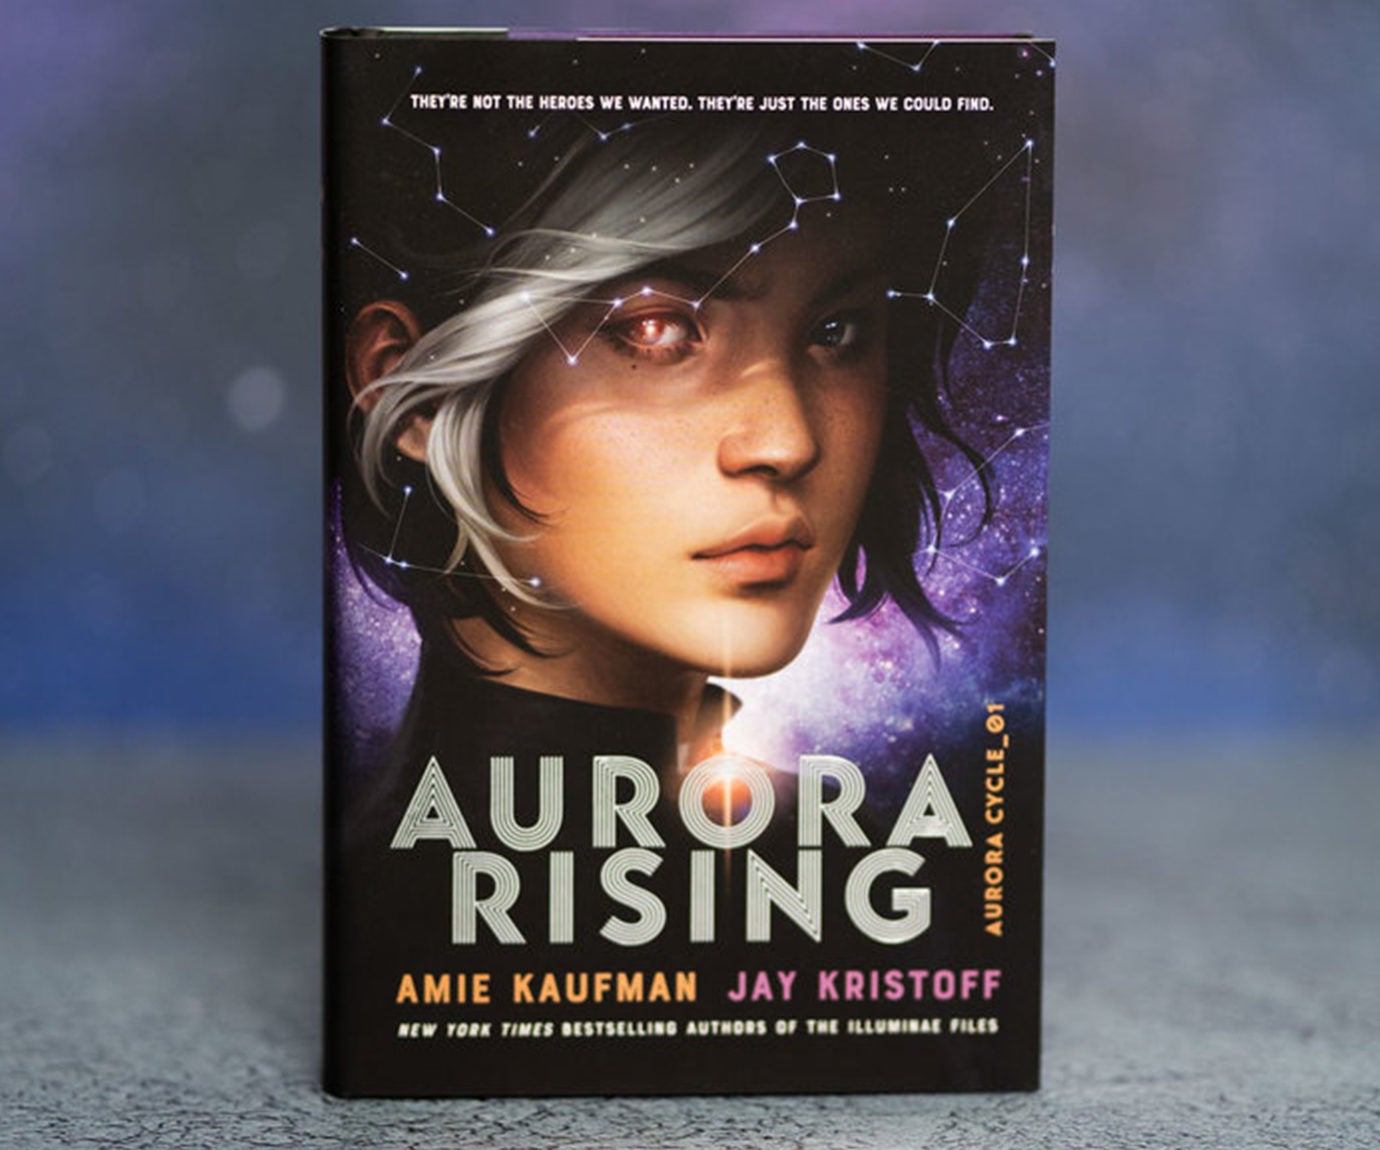 Read a Free Excerpt from Aurora Rising by Amie Kaufman and Jay